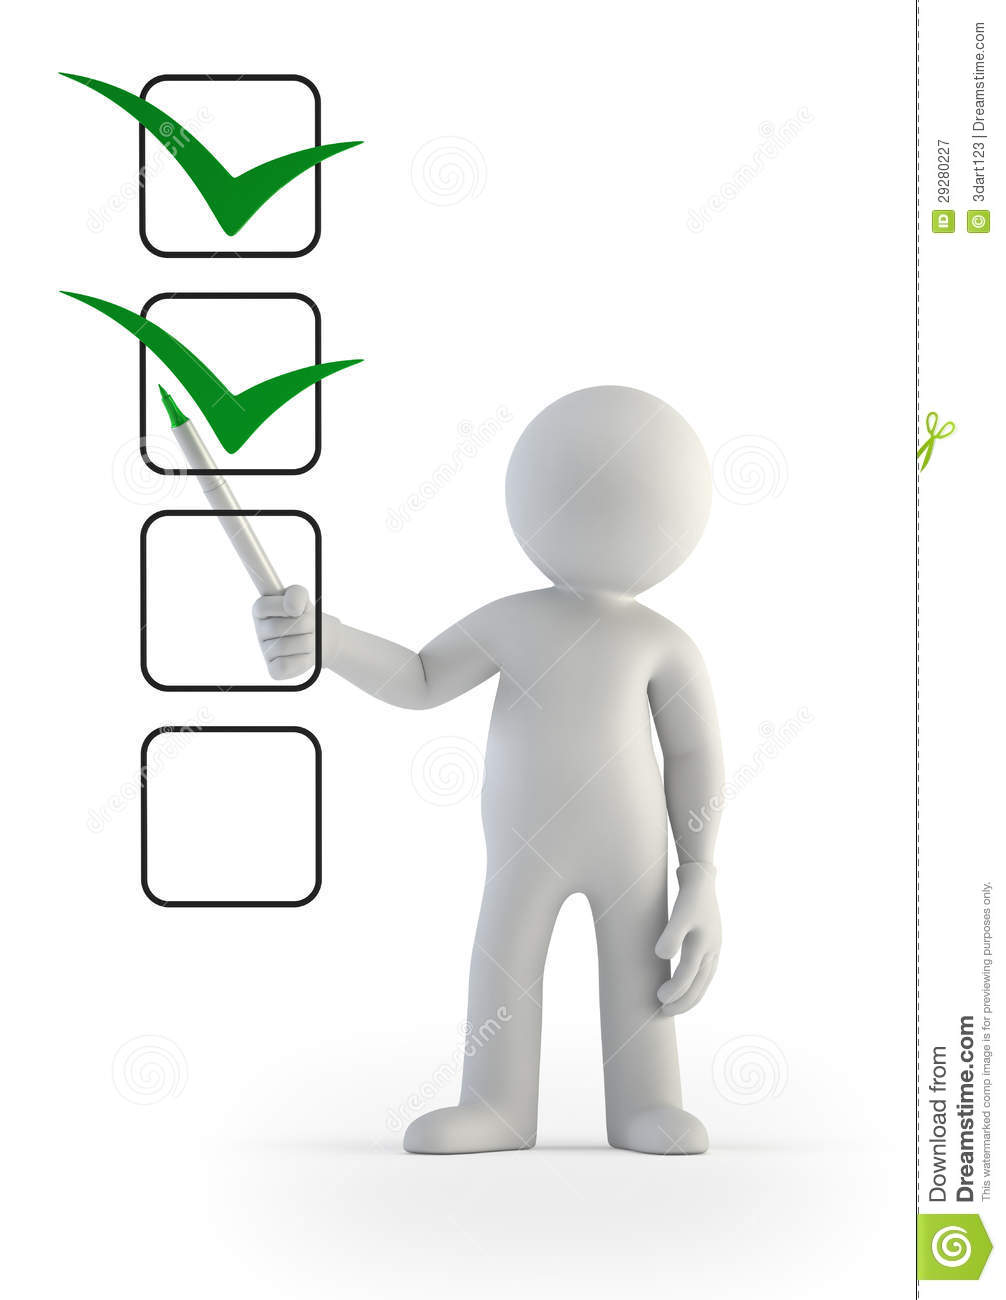 3d Small People   Checklist Royalty Free Stock Photography   Image